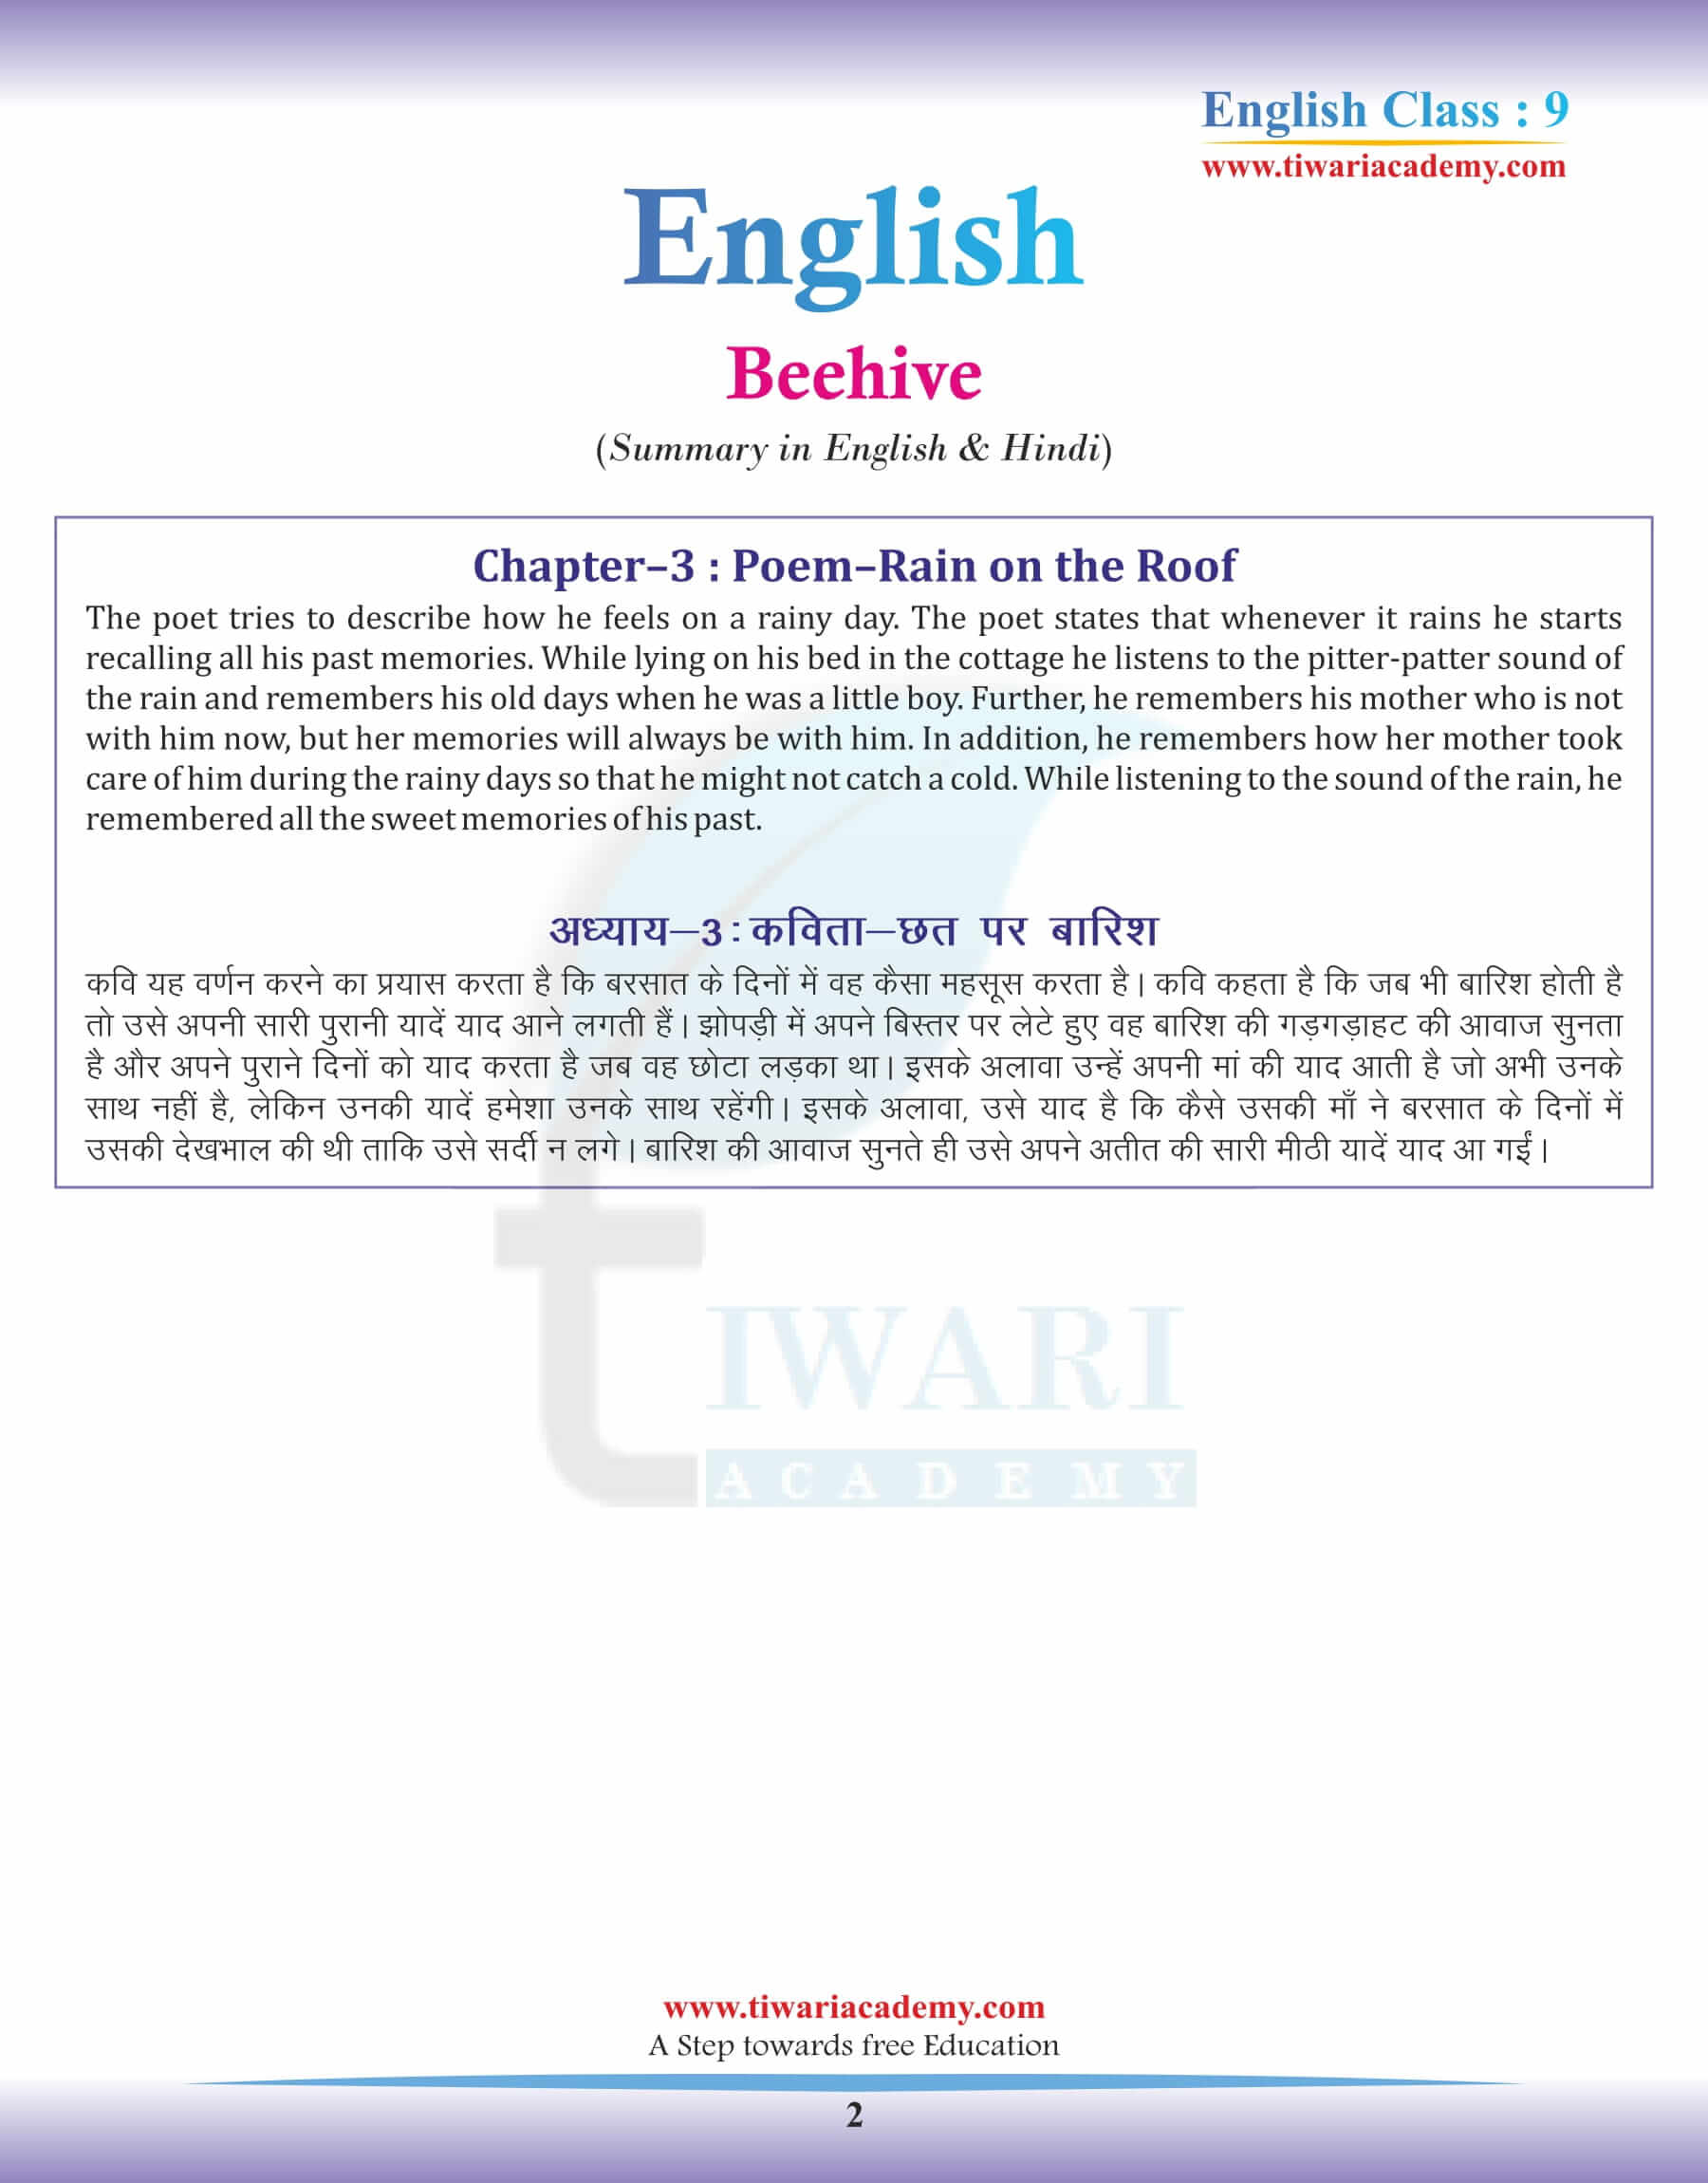 9th English Beehive Chapter 3 Summary Poem in Hindi and English